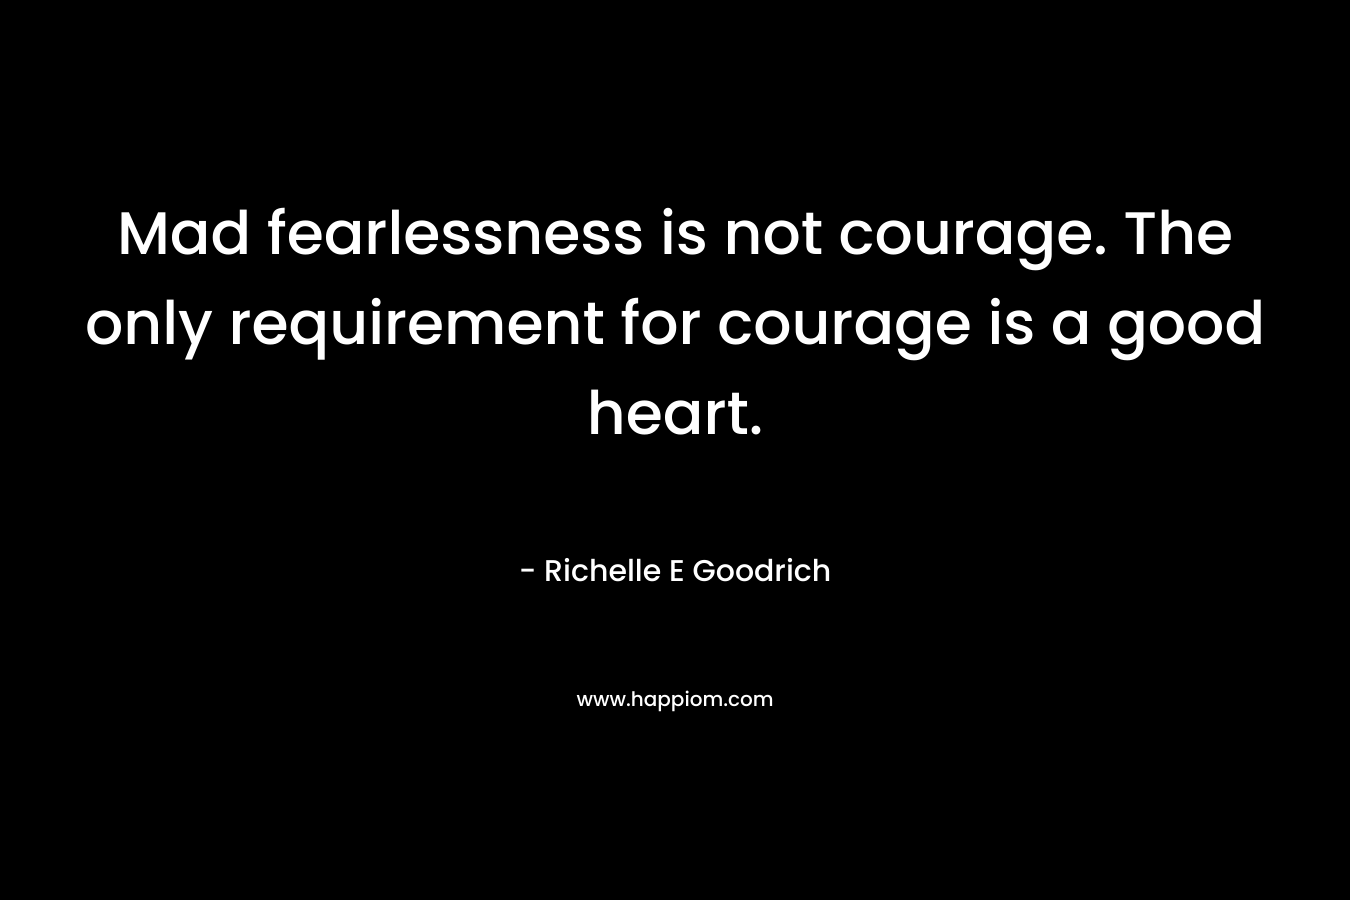 Mad fearlessness is not courage. The only requirement for courage is a good heart.